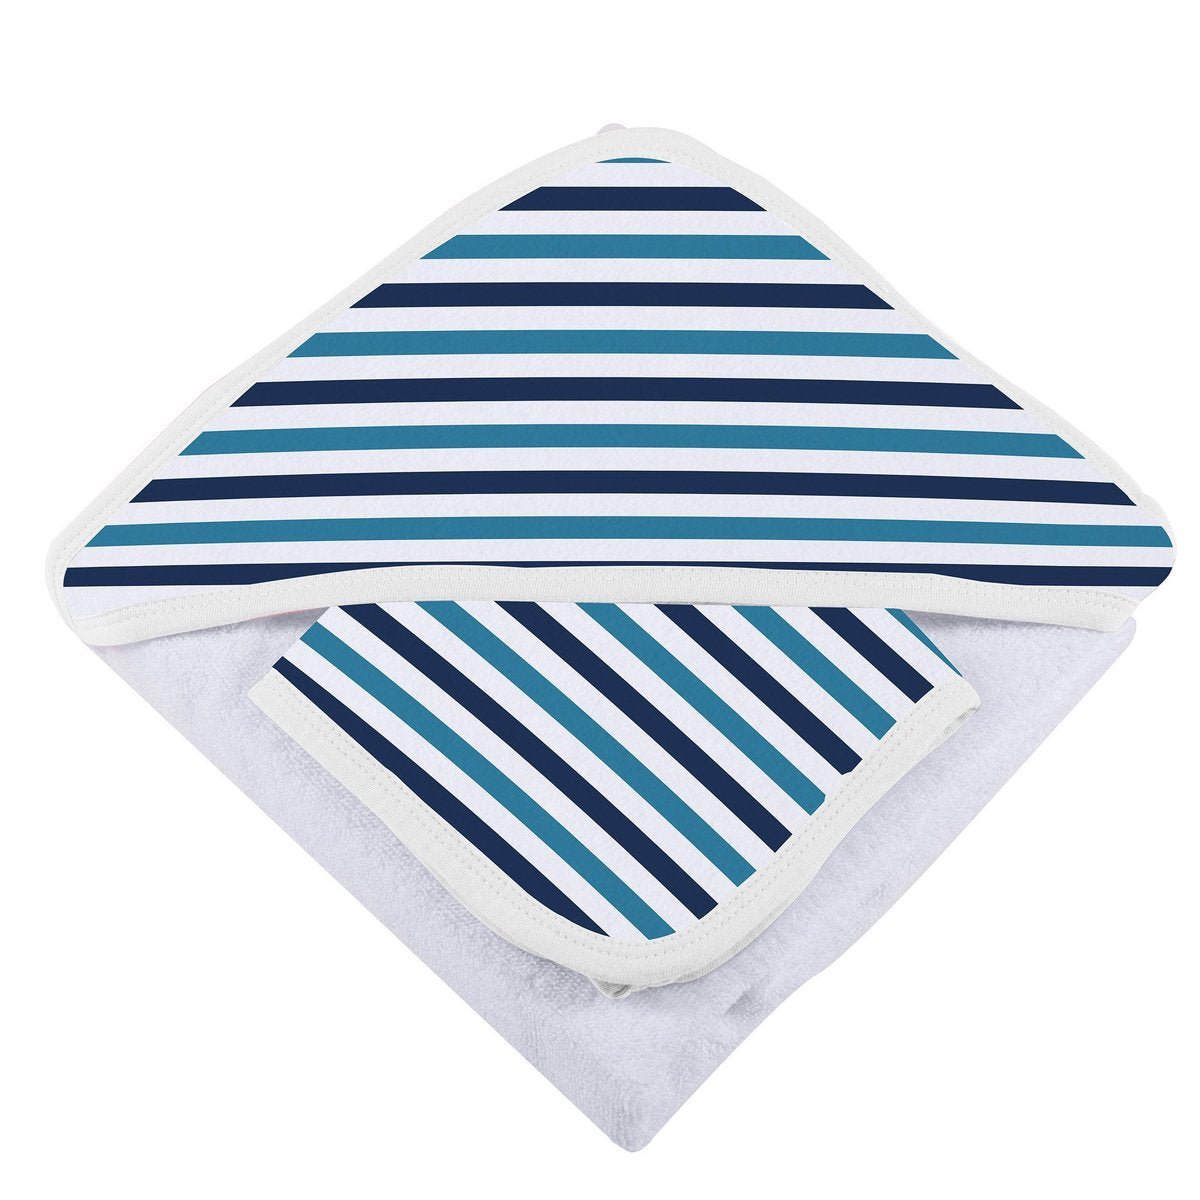 Blue and White Stripe Bamboo Hooded Towel and Washcloth Set *FINAL SALE* - SuperMom Headquarters